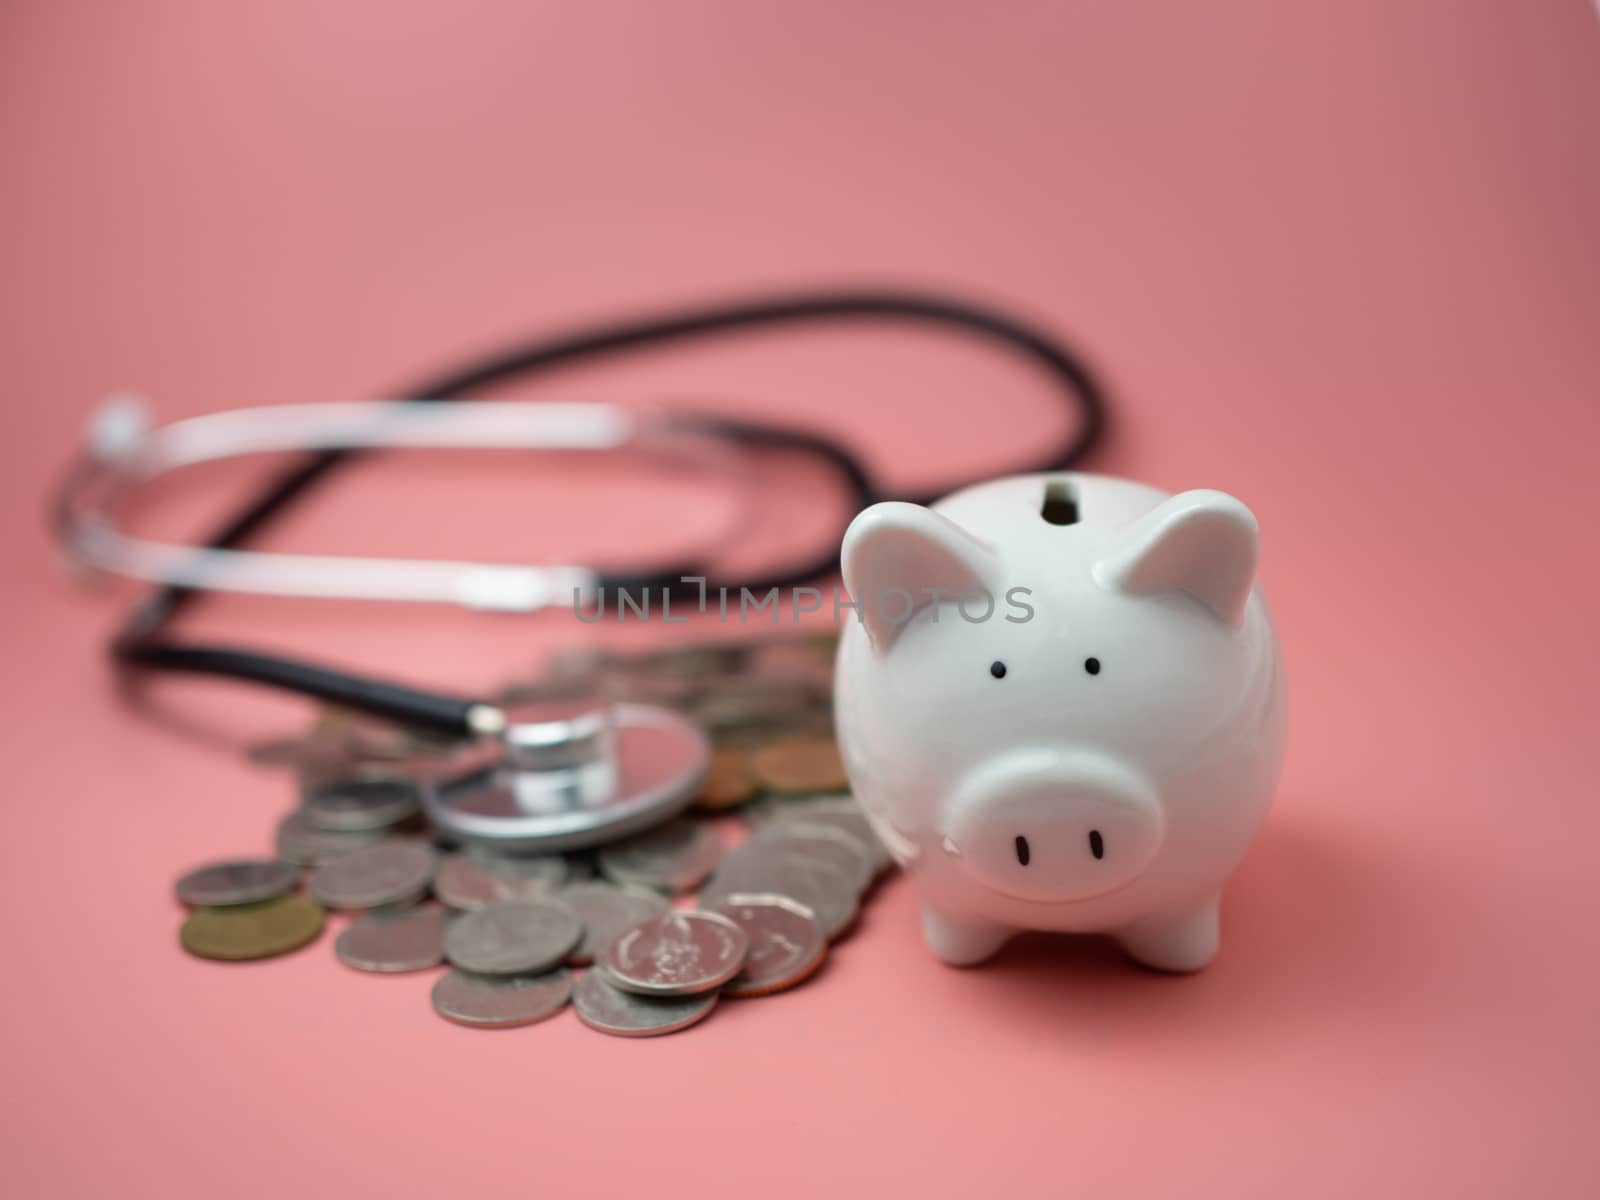 Stethoscope on the pile of money and piggy bank on pink background.
Financial health check concept, debt and finance crisis.